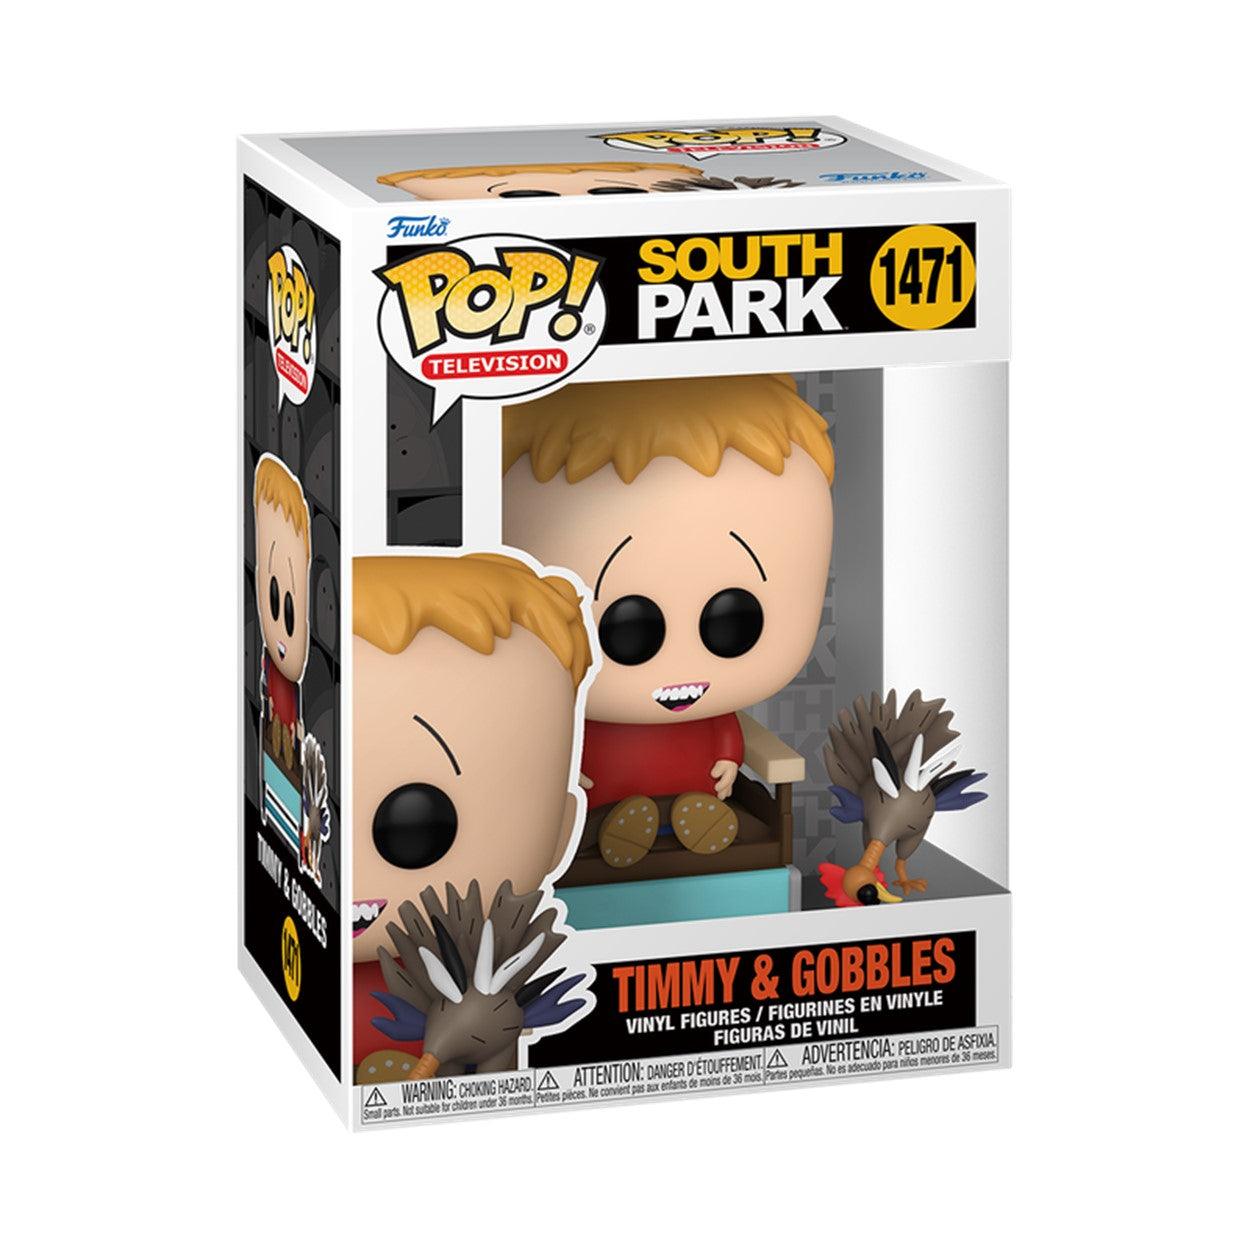 Pop! Television - South Park - Timmy & Gobbles - #1471 - Hobby Champion Inc